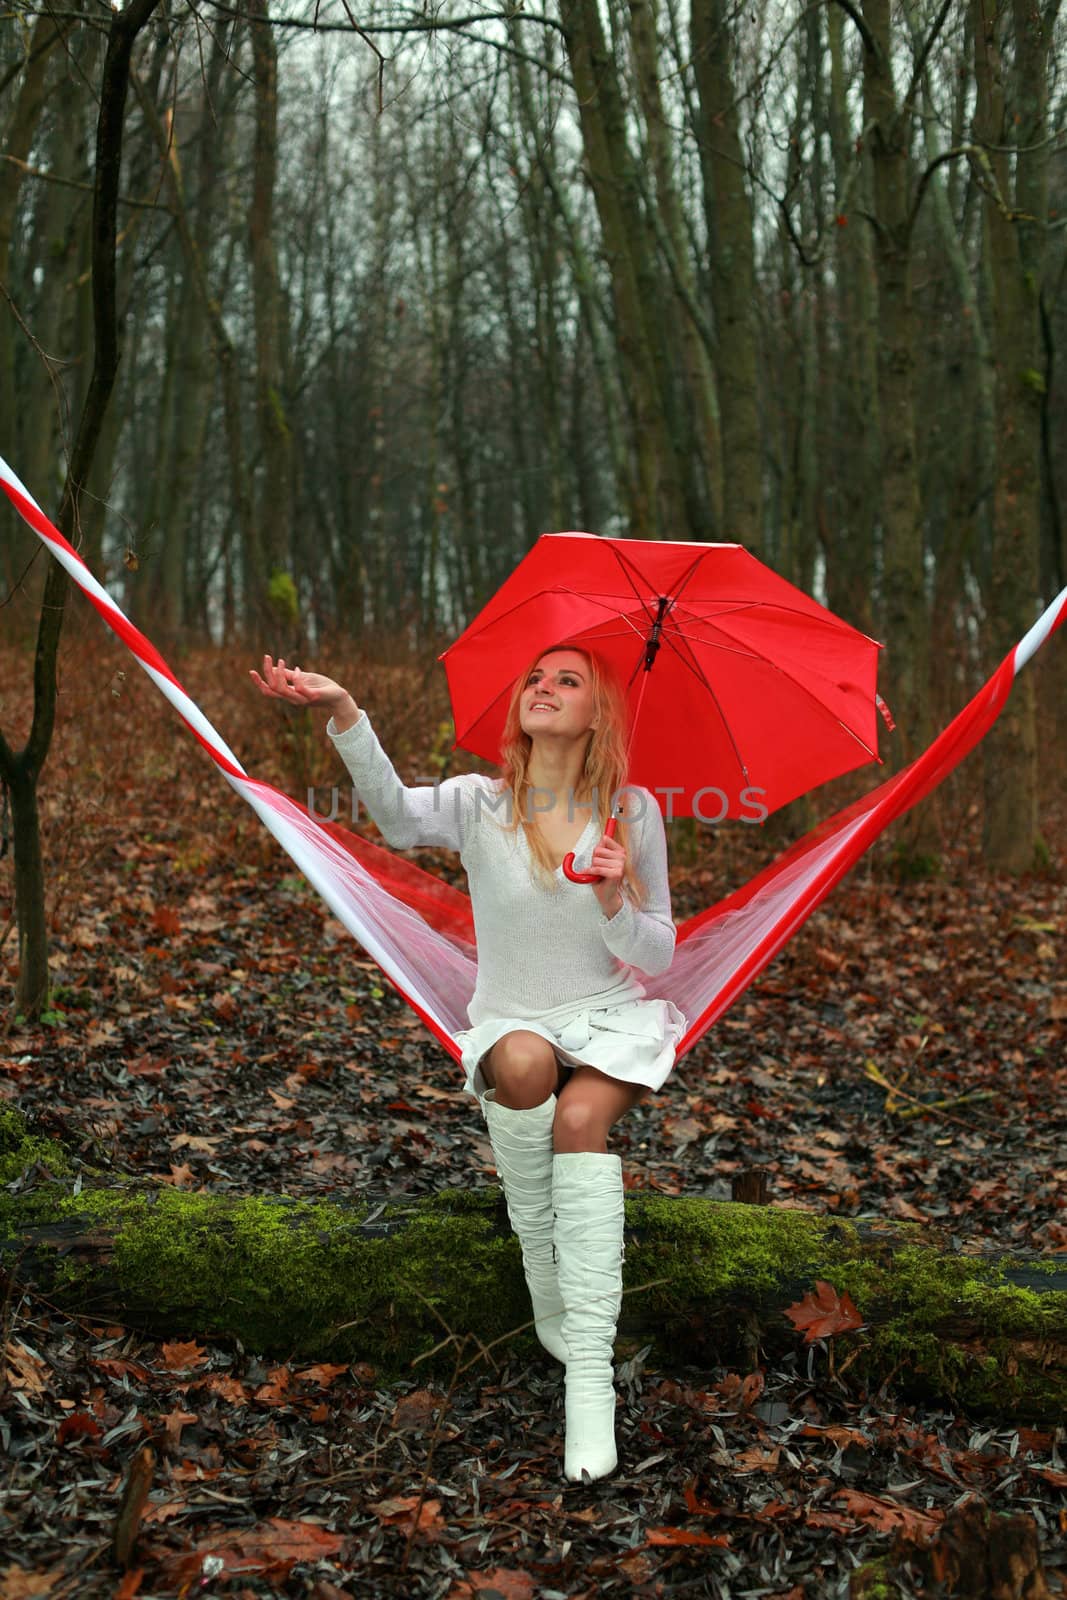 An image of a young woman with red umbrella